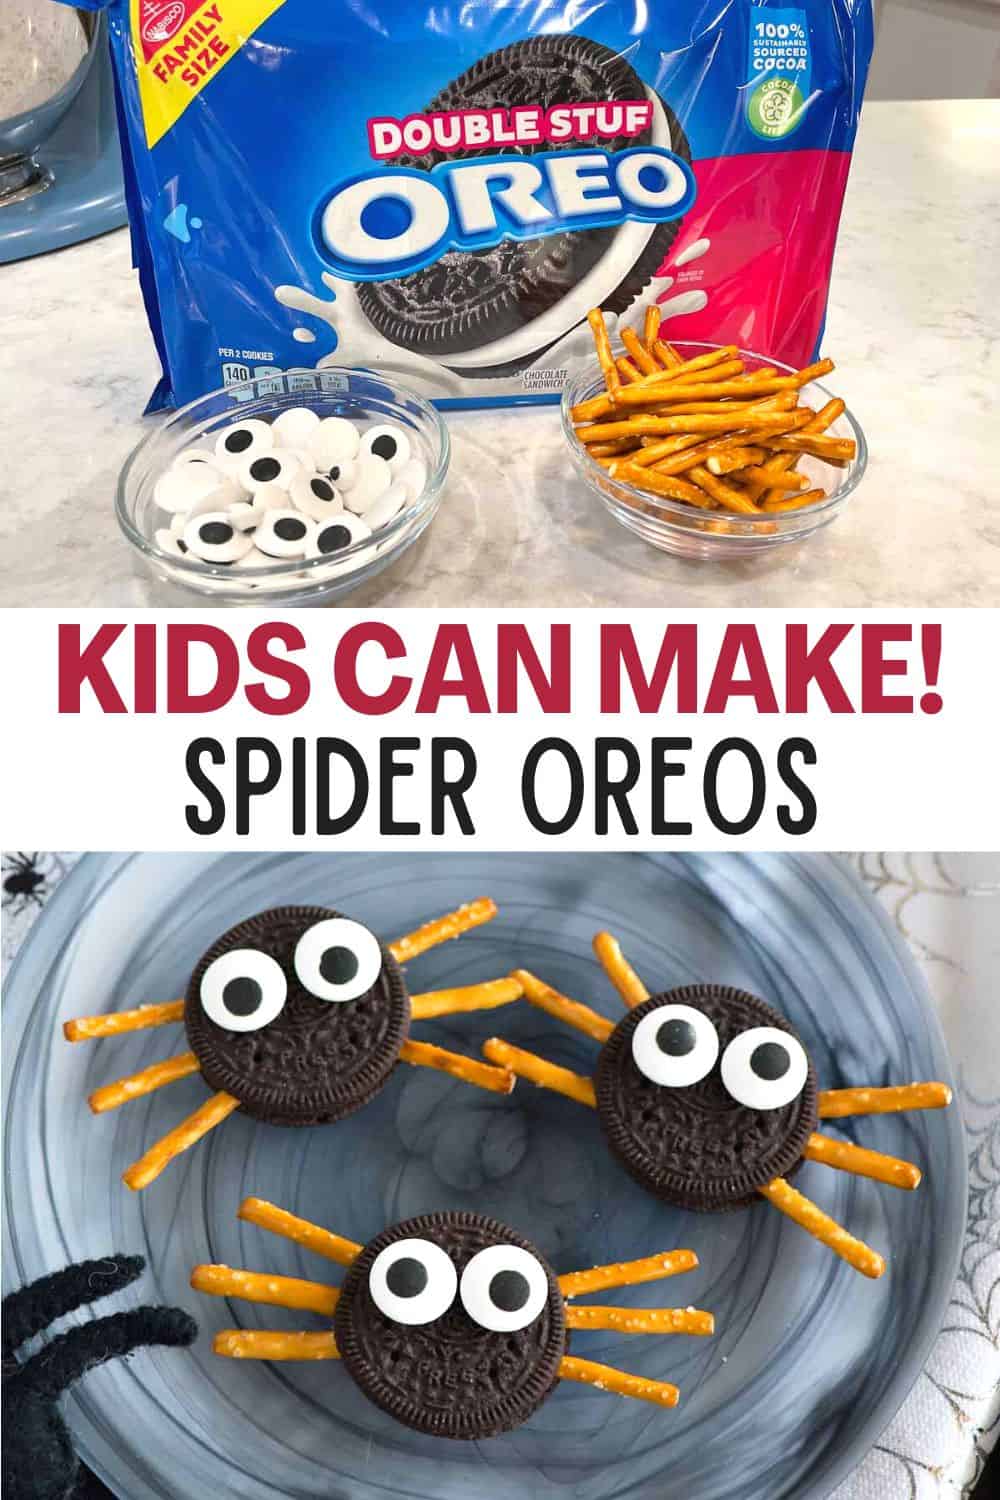 Make these adorable spider Oreos for Halloween using four fun snack ingredients. Serve these spooky spider cookies as a festive treat or use them as cupcake toppers -- your kids will surely love them!